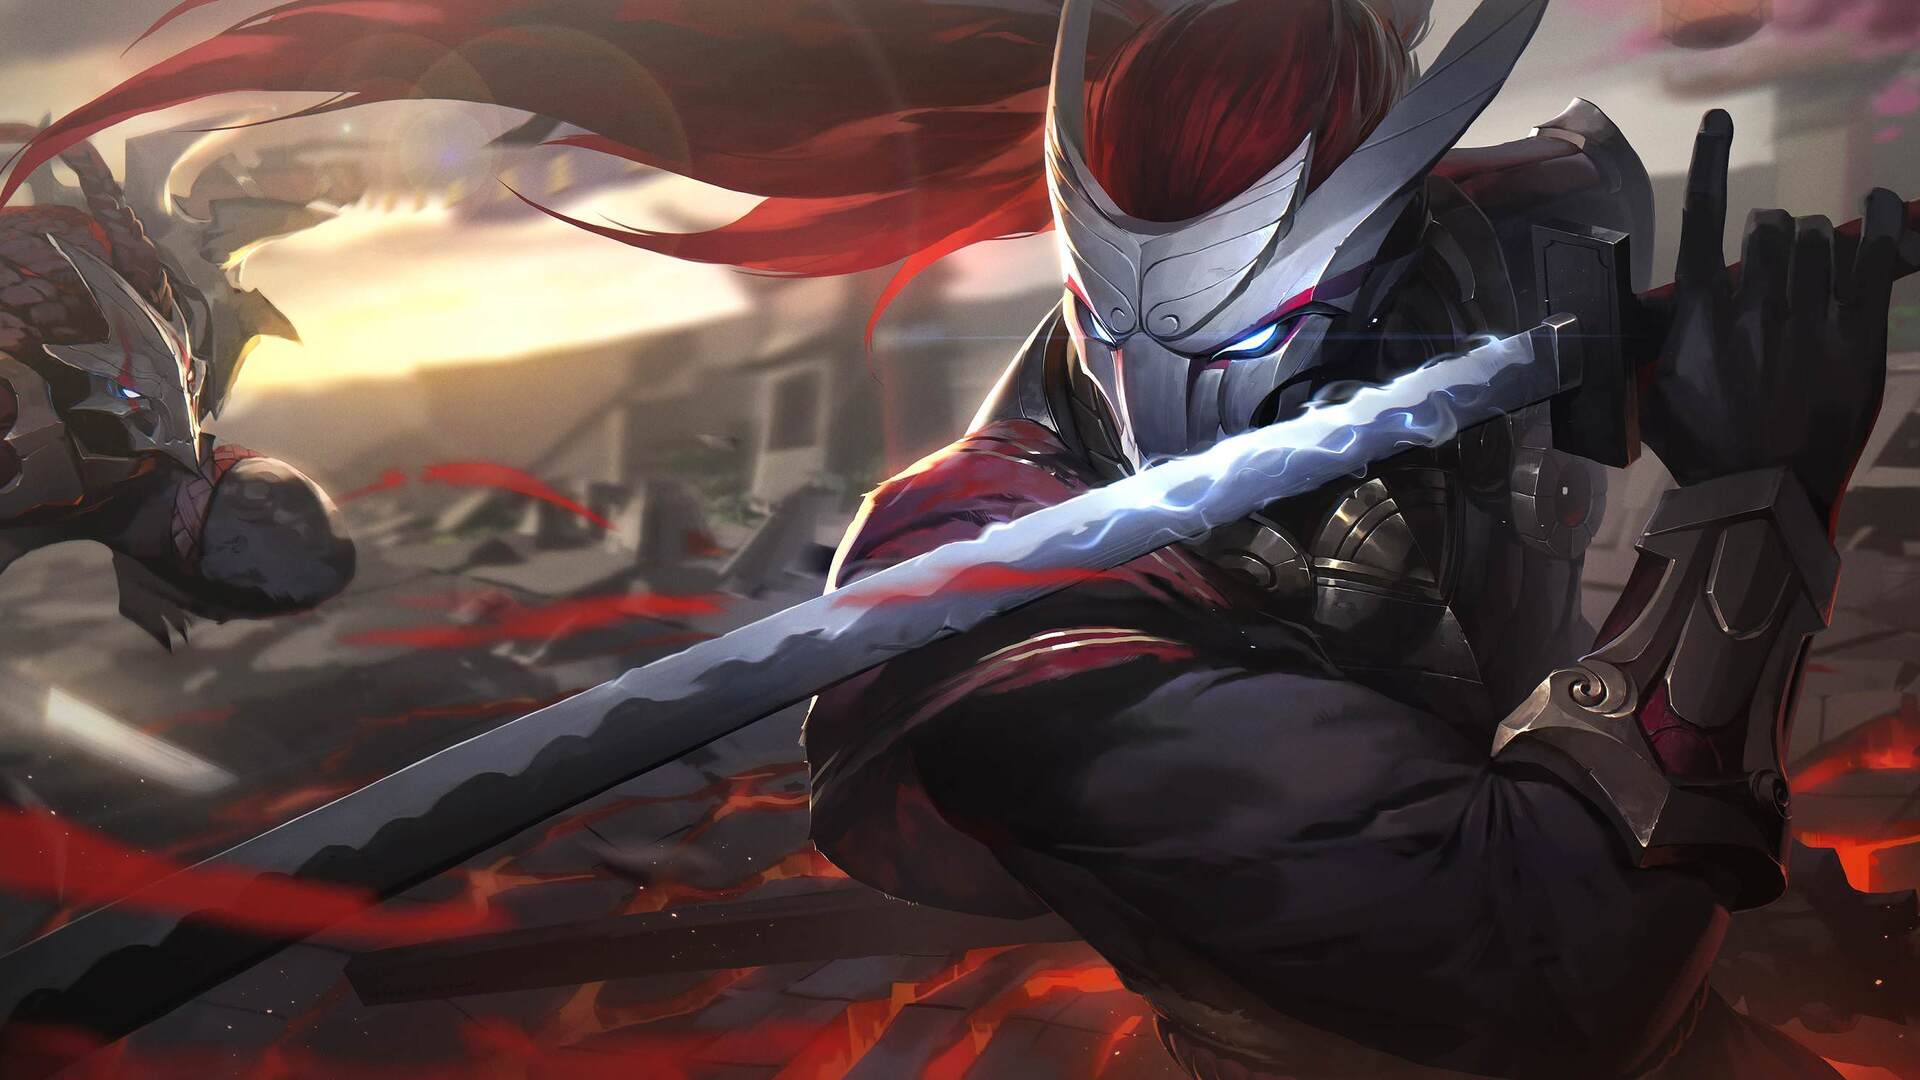 yasuo wallpaper 1920x1080,cg artwork,action adventure game,anime,pc game,fictional character